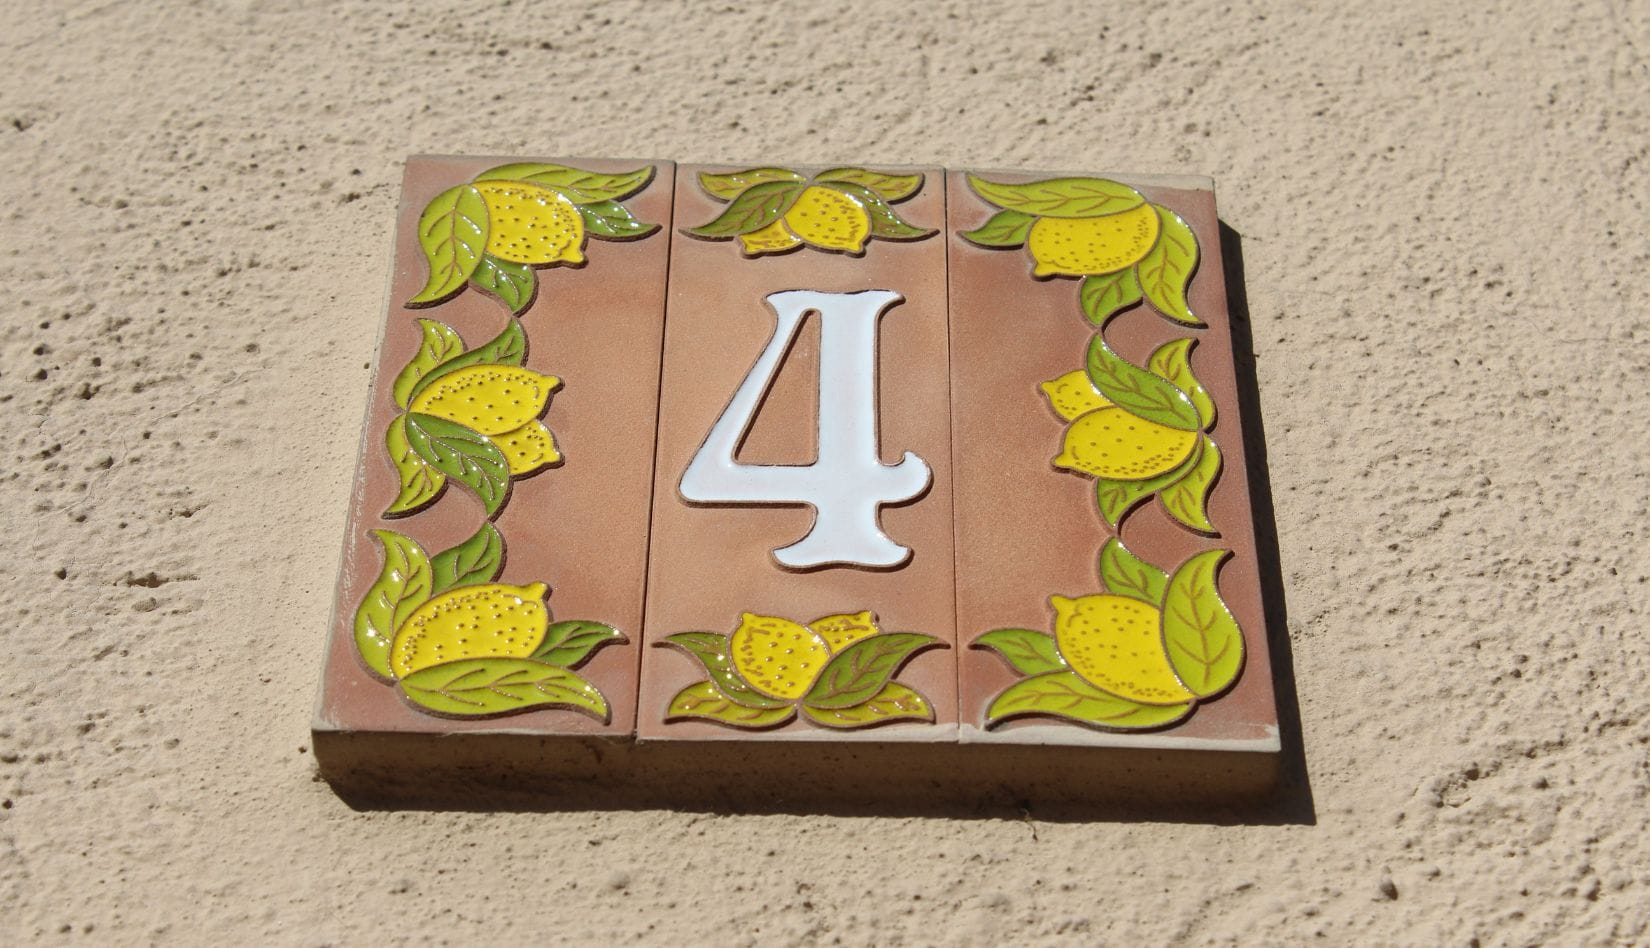 Decorative brick with the number '4' and lemons.